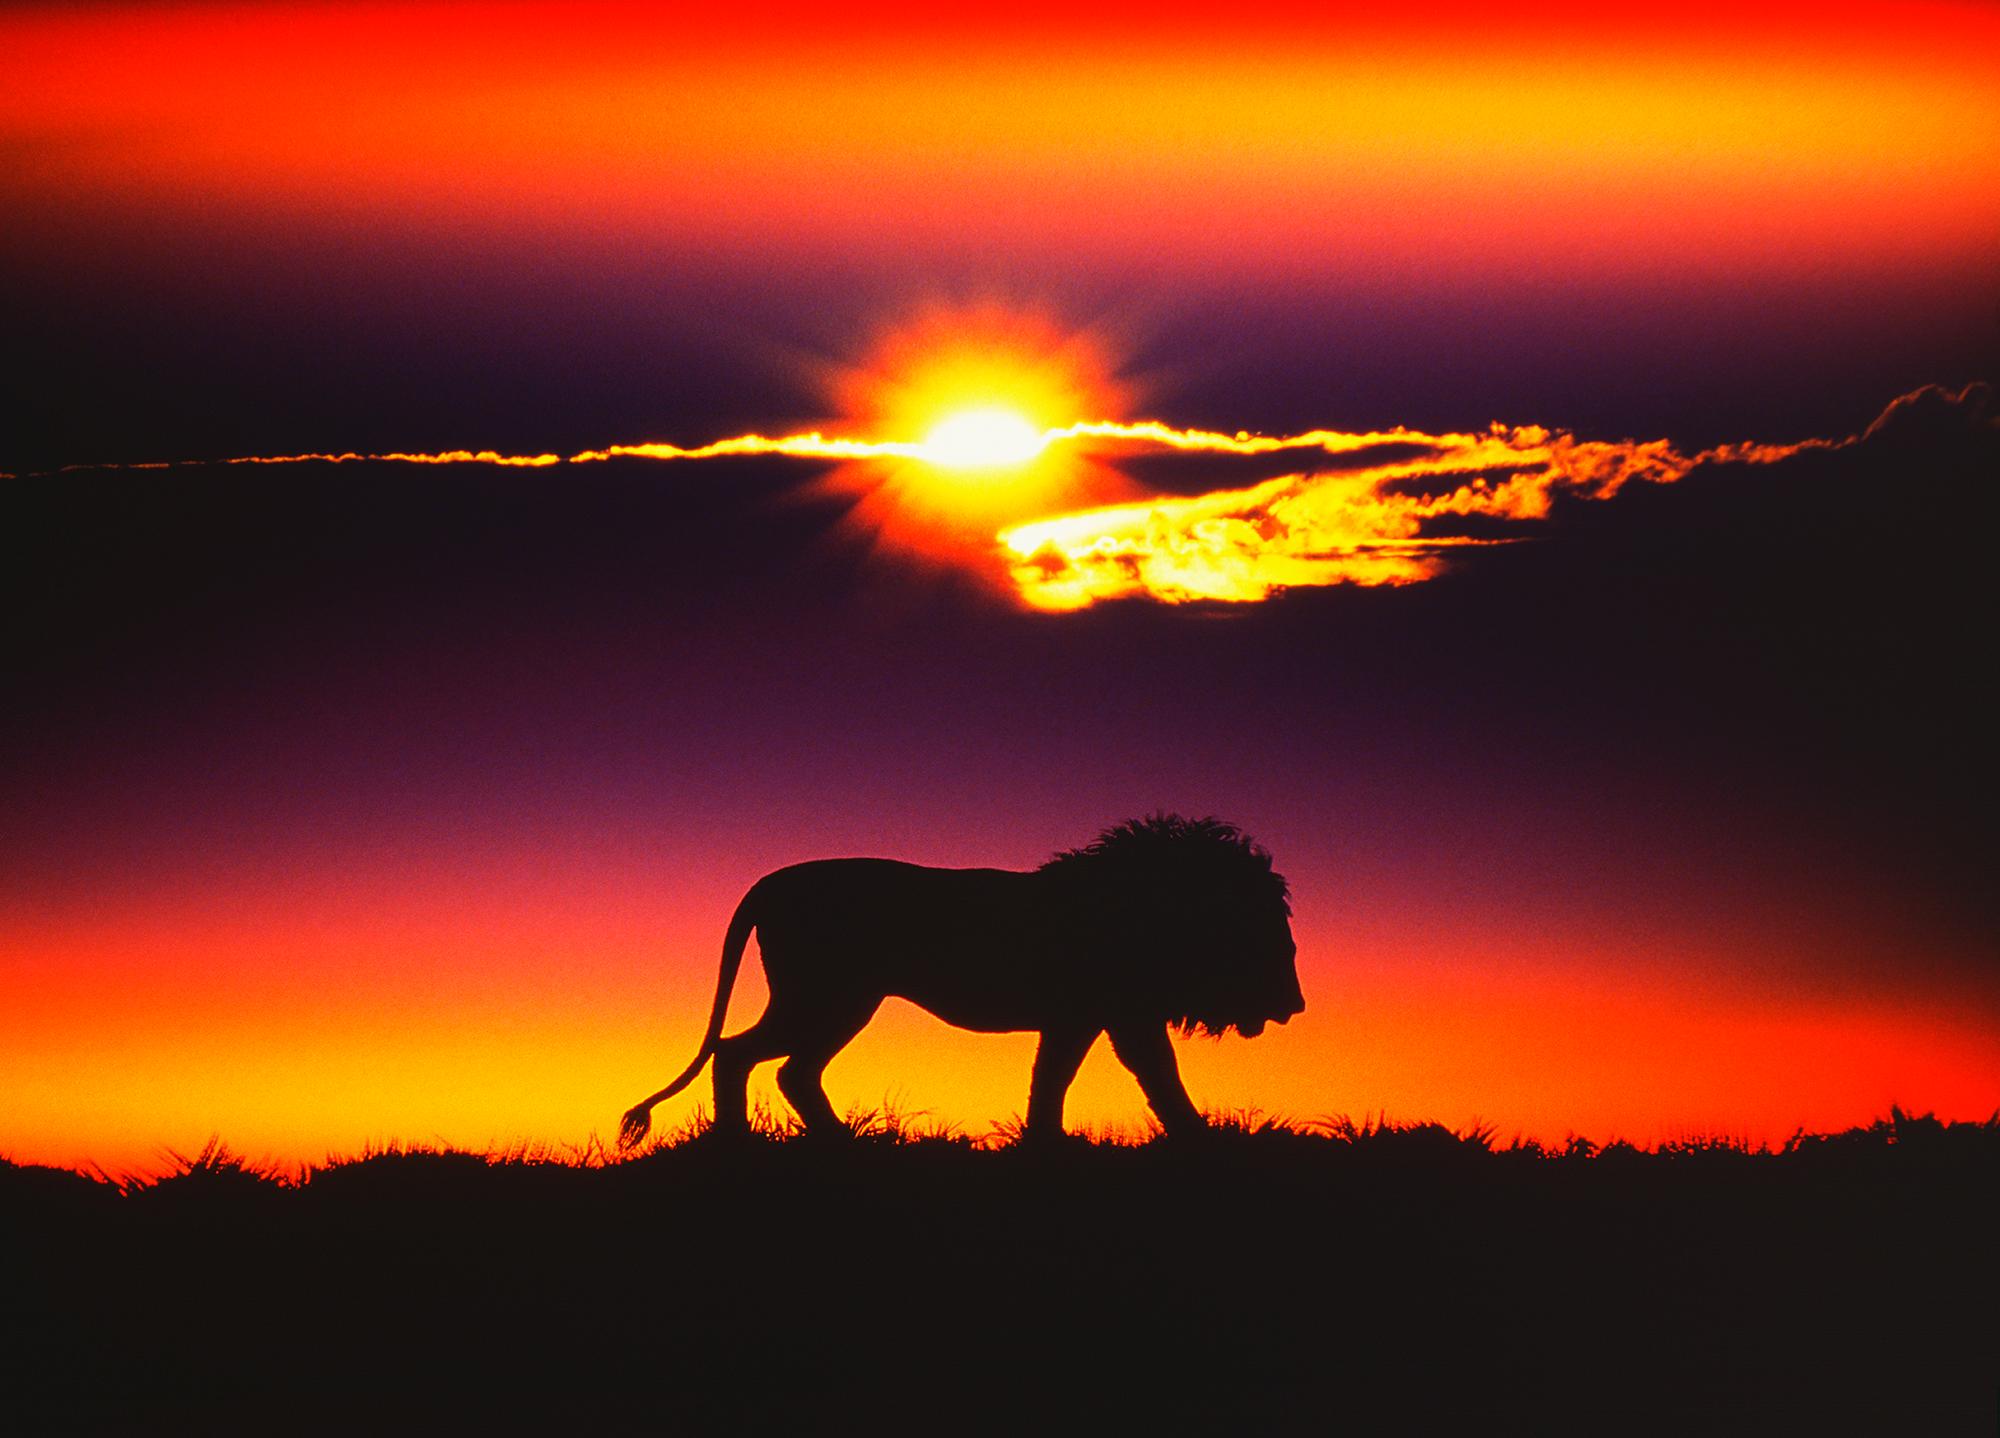 Mitchell Funk Figurative Photograph - Noble Lion at Sunset